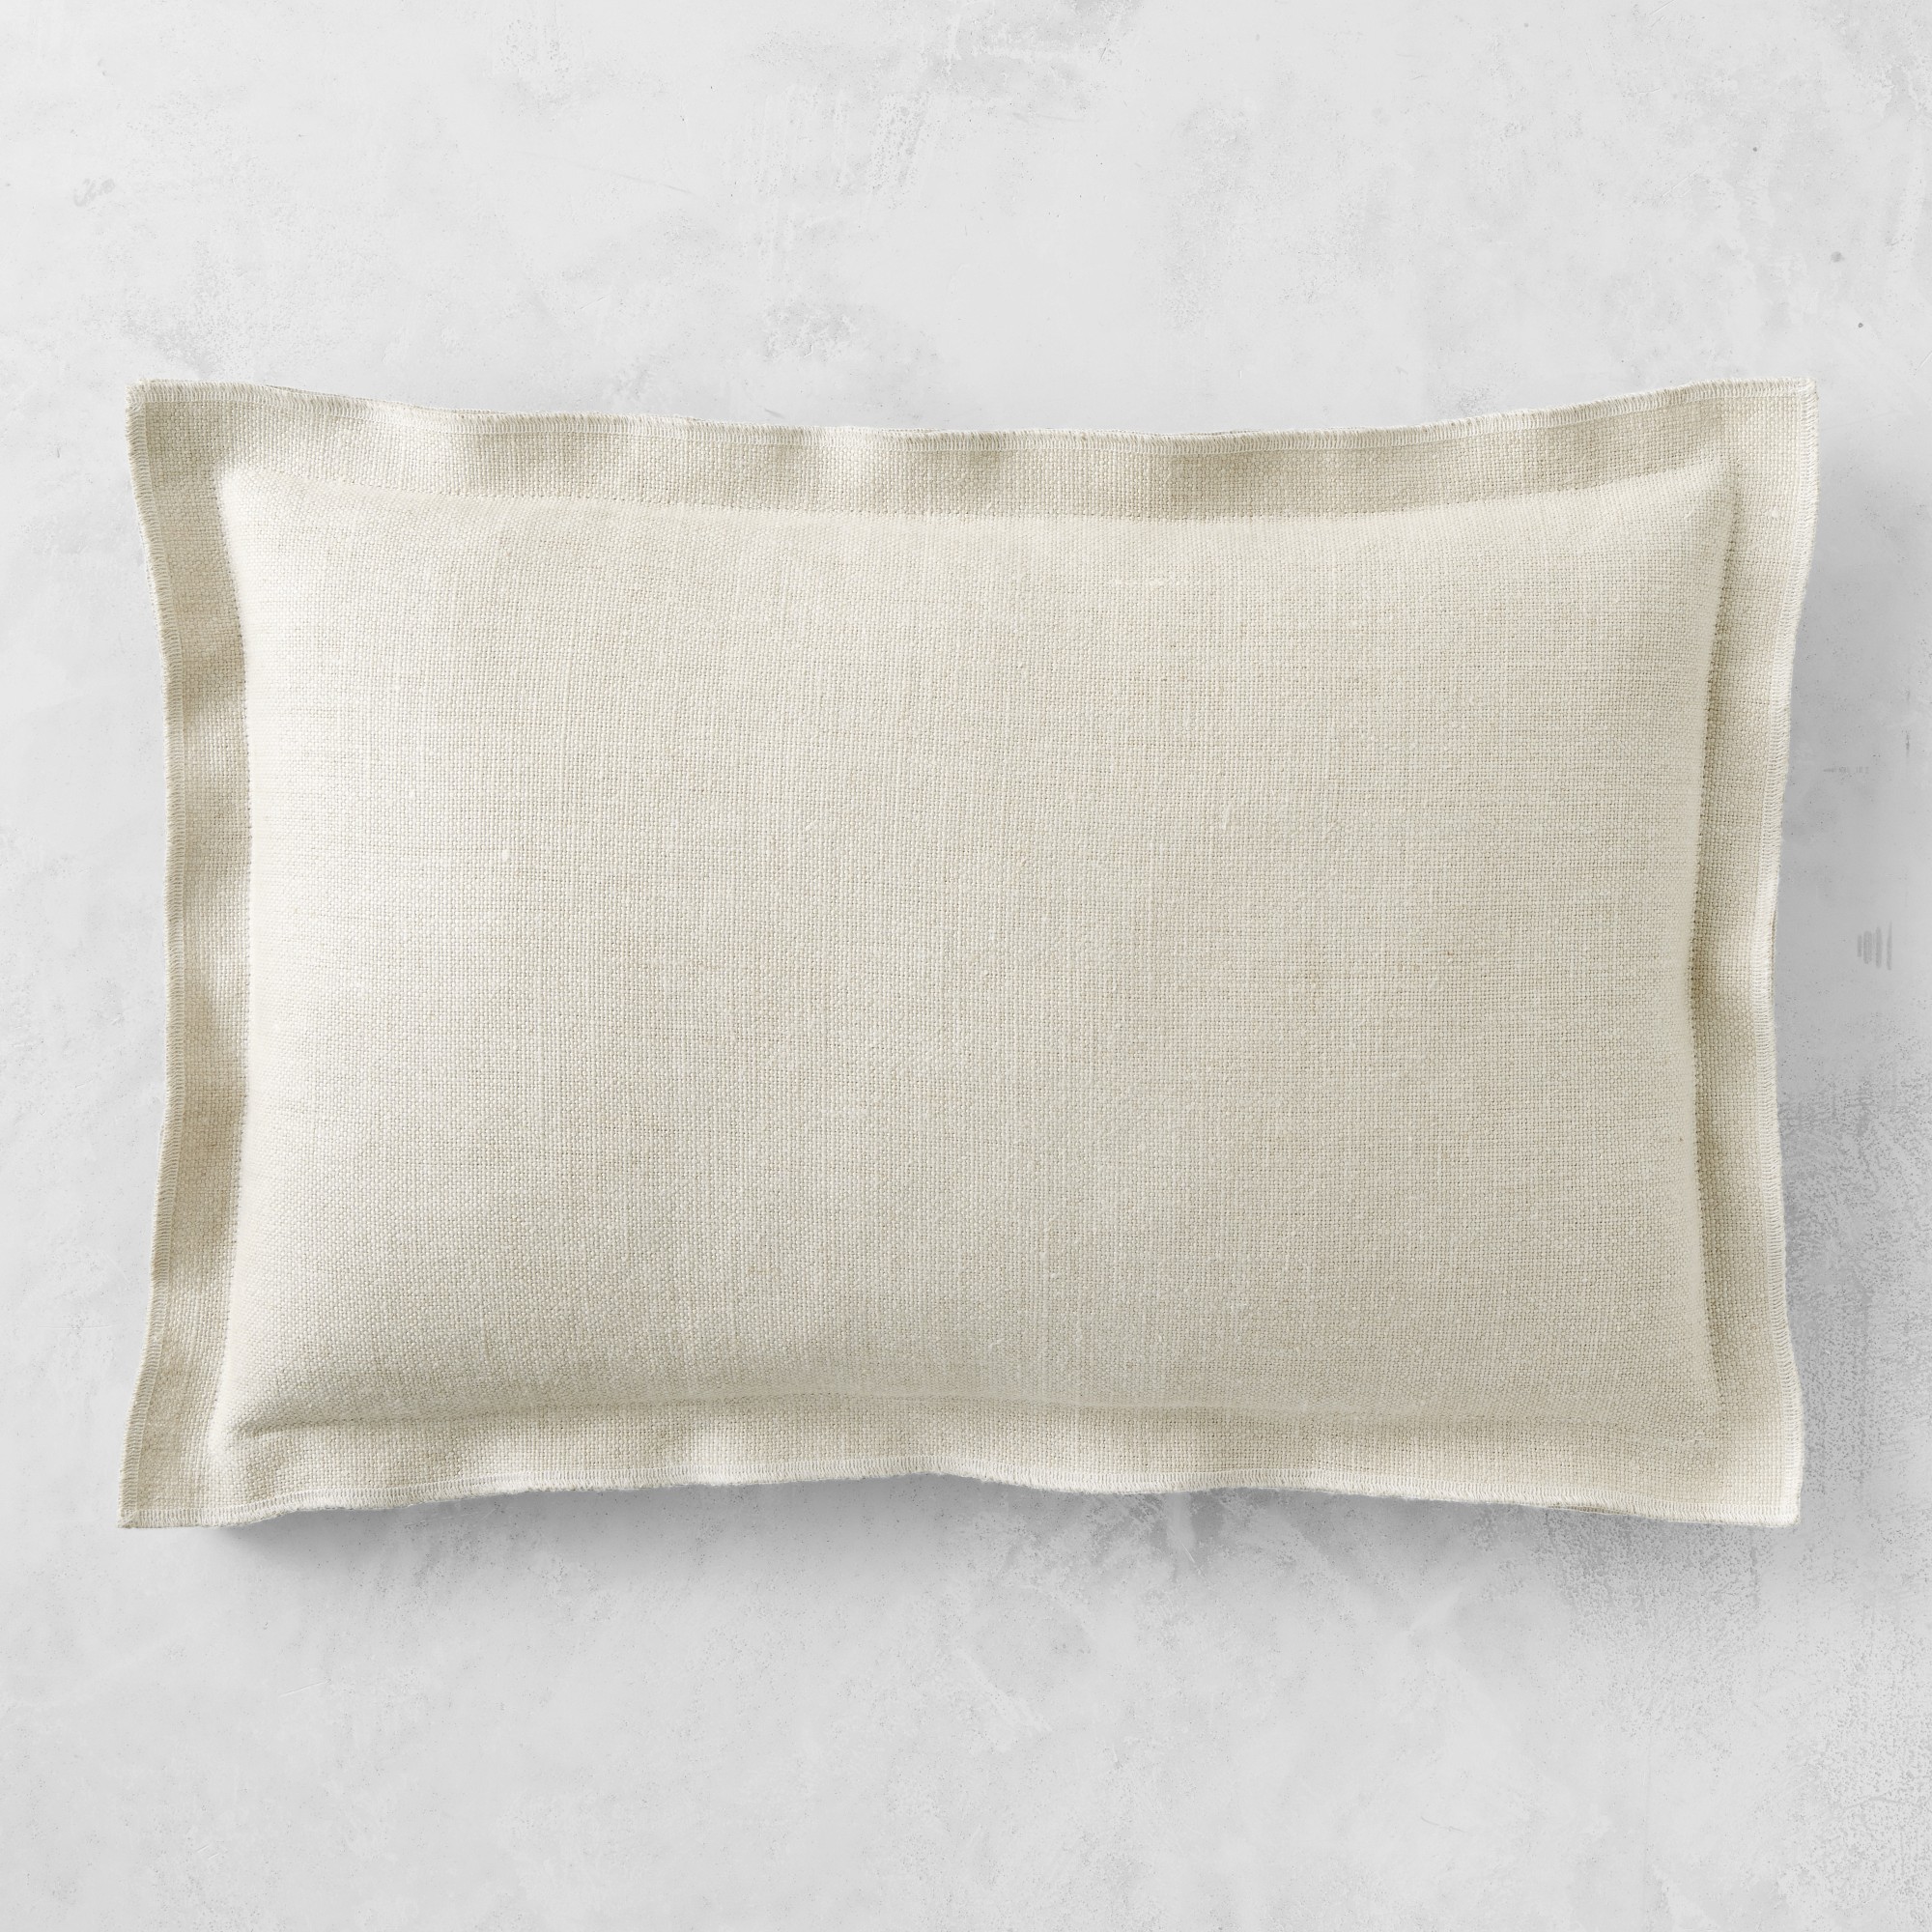 Double Flange Belgian Linen with Libeco™ Pillow Cover